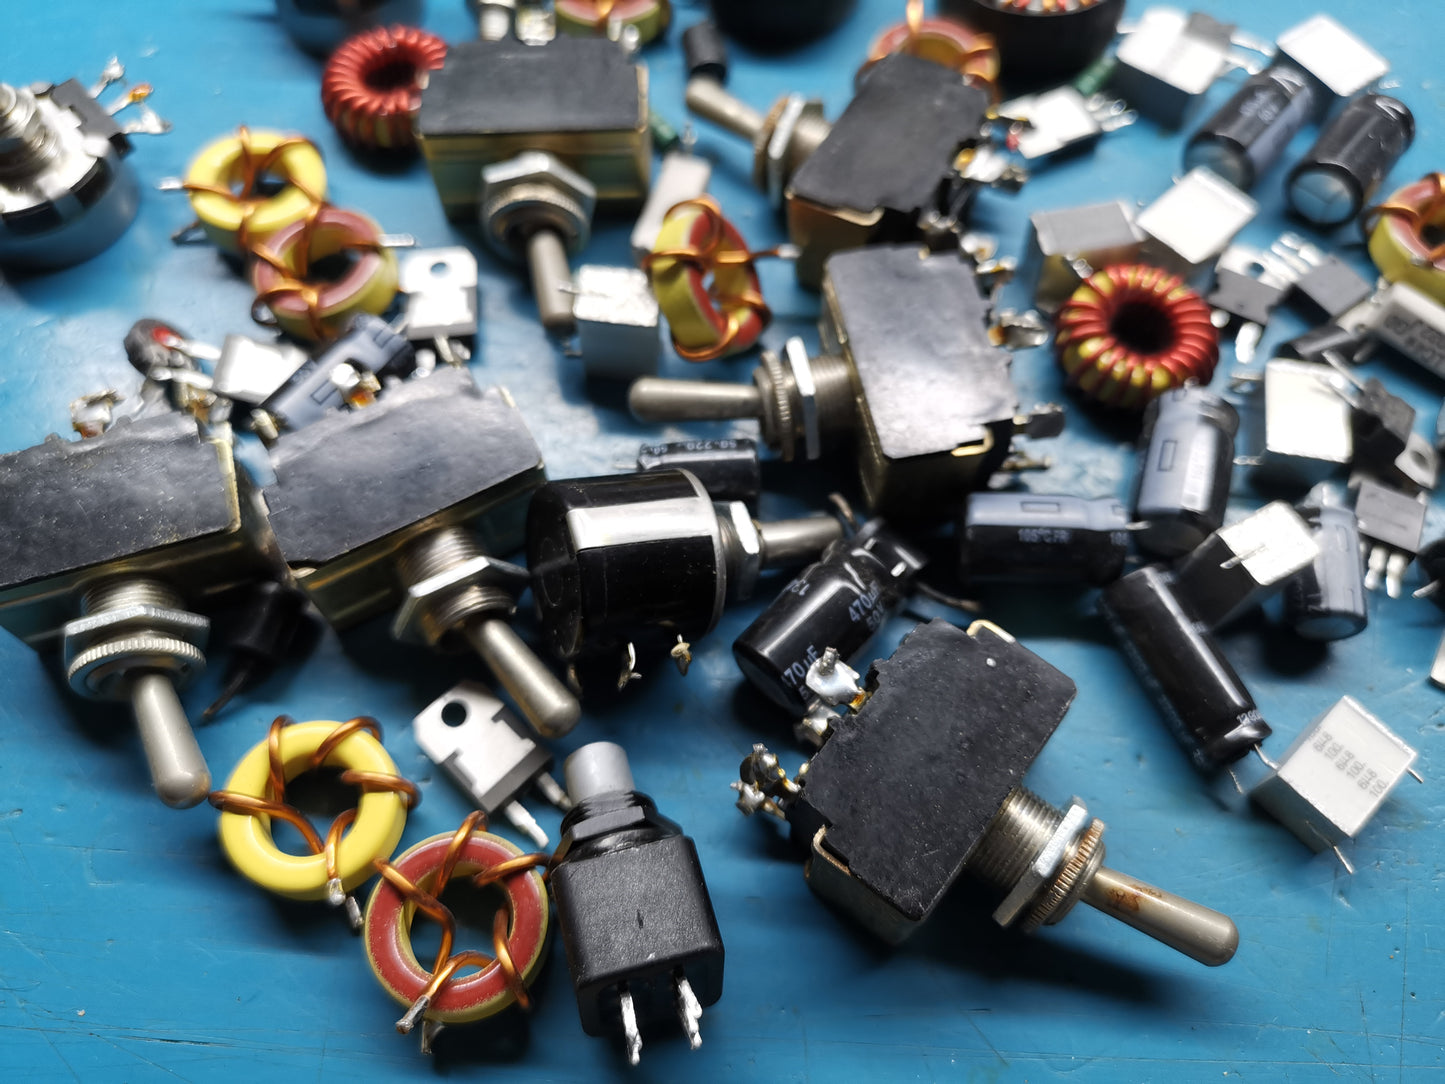 Various Electronic Component And Part From Electronic Equipment